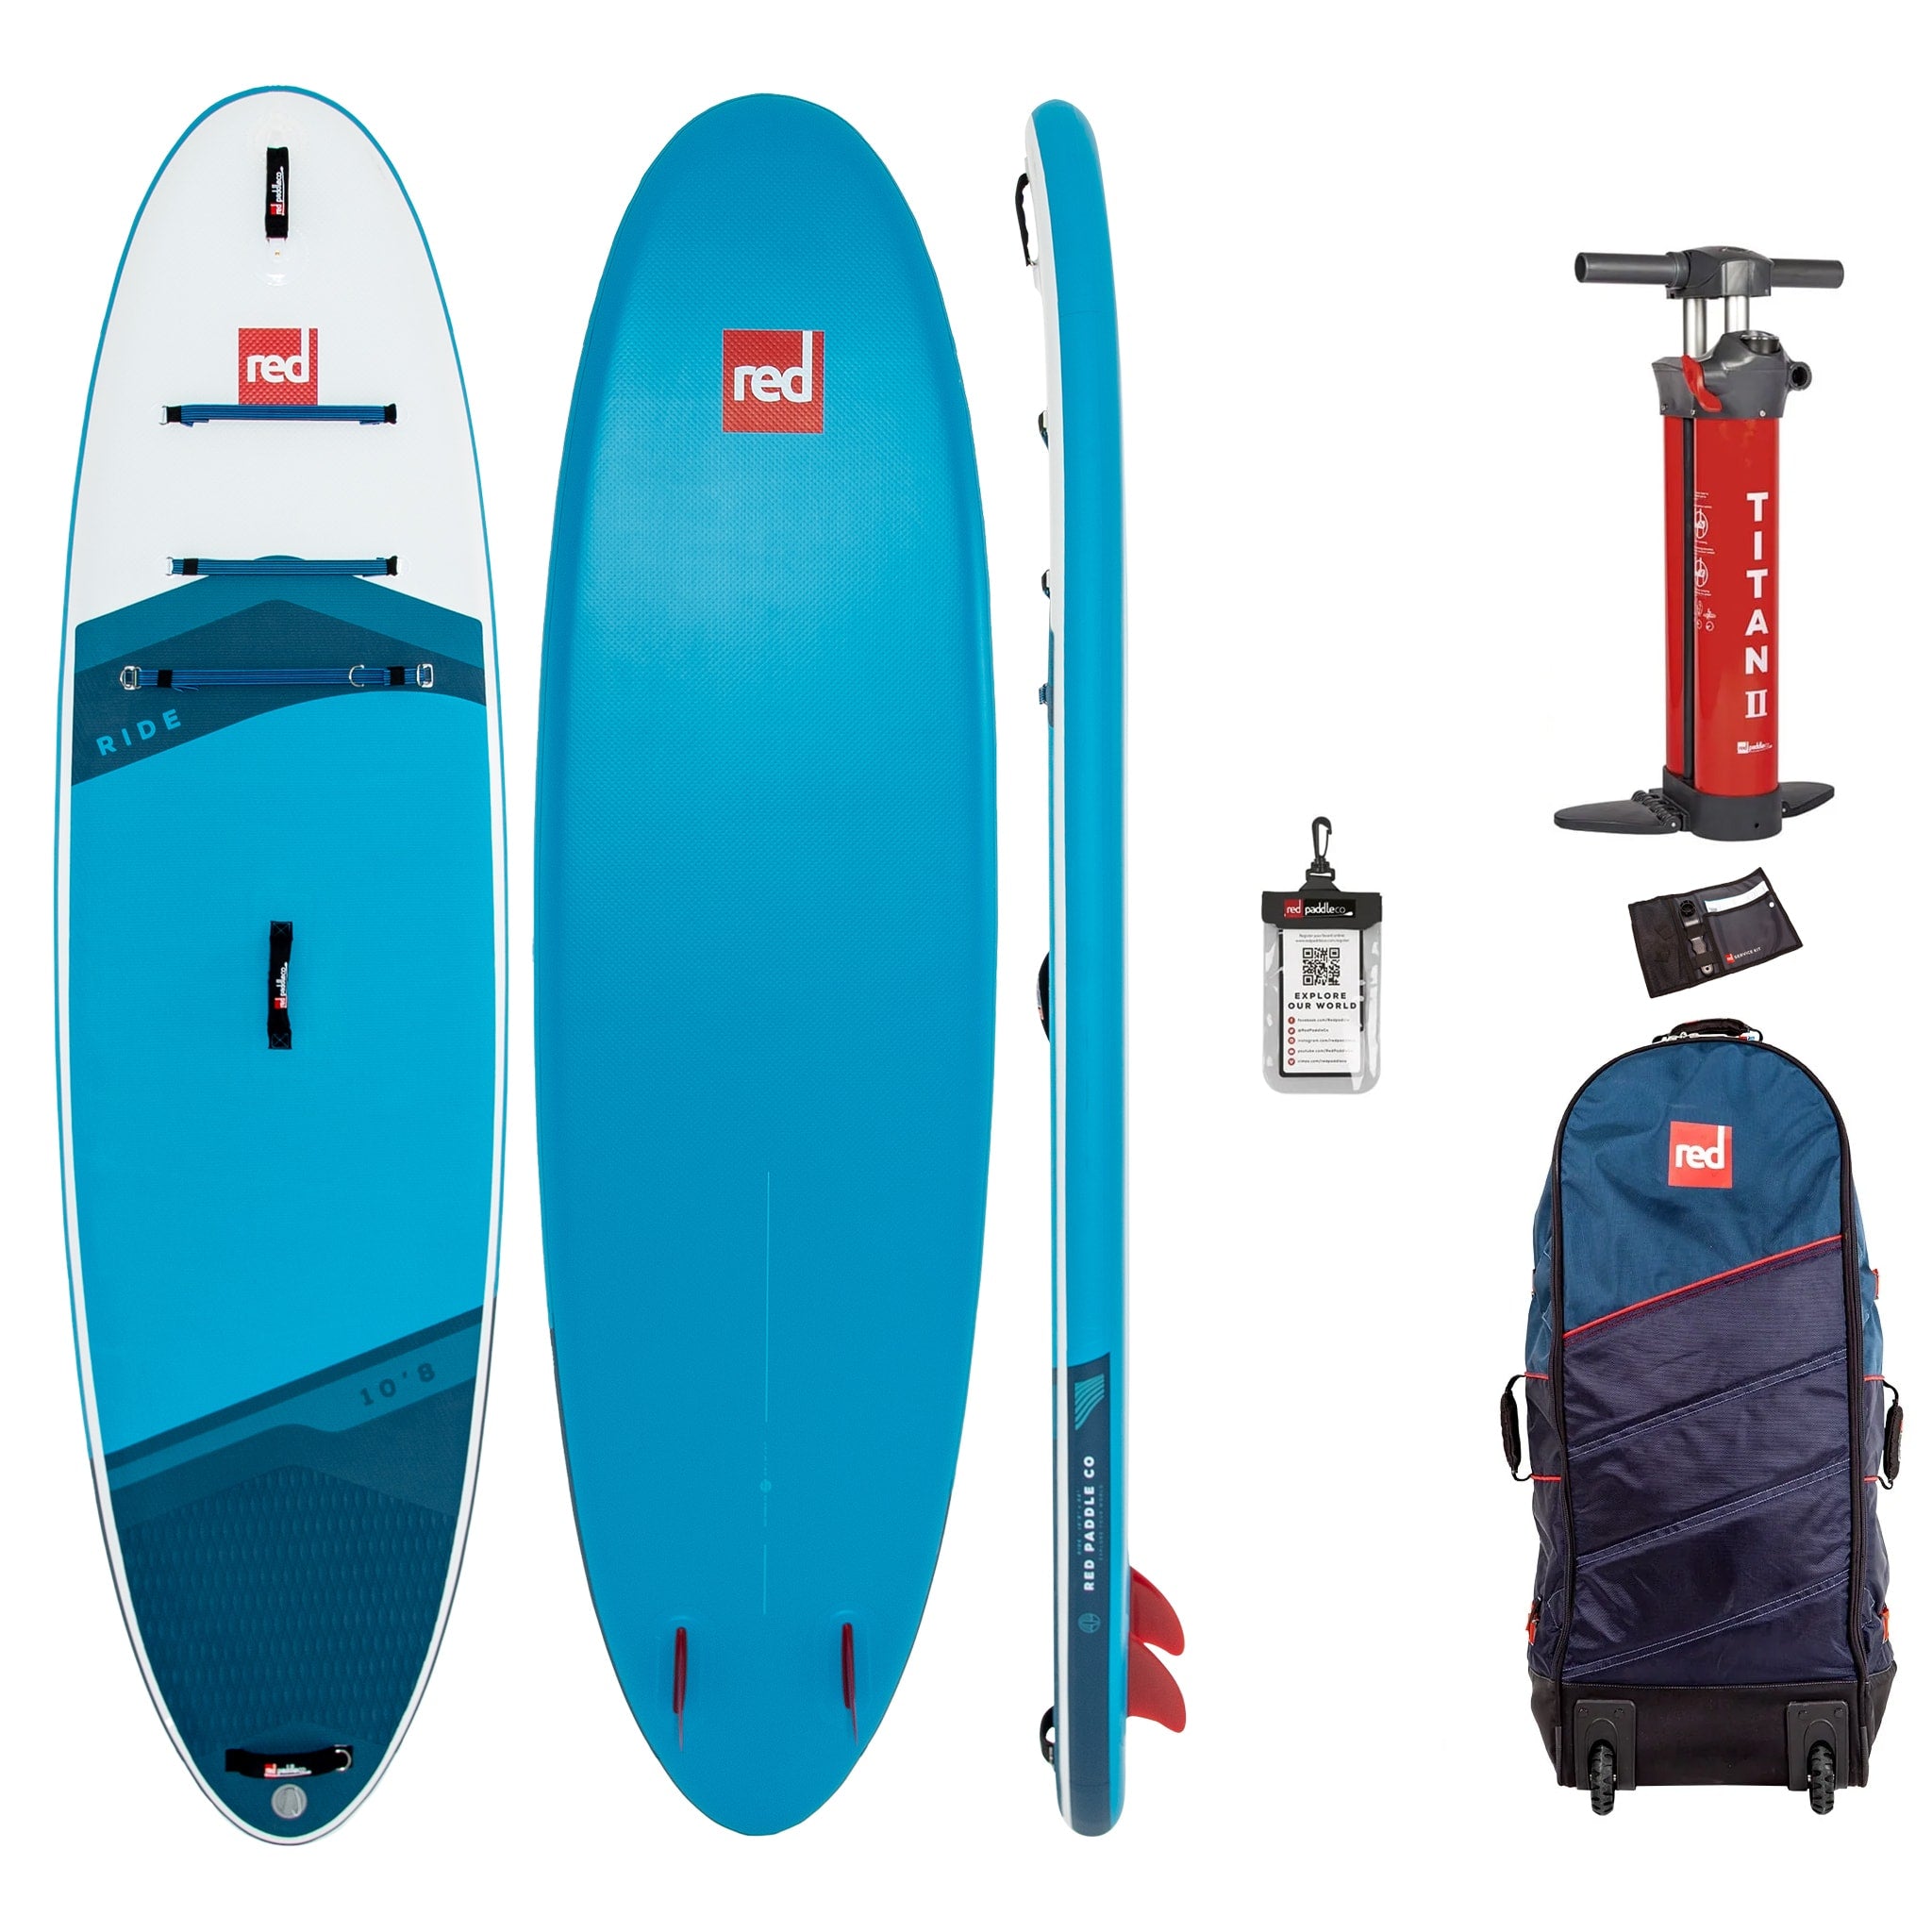 Red Co 10'8 Ride Inflatable SUP